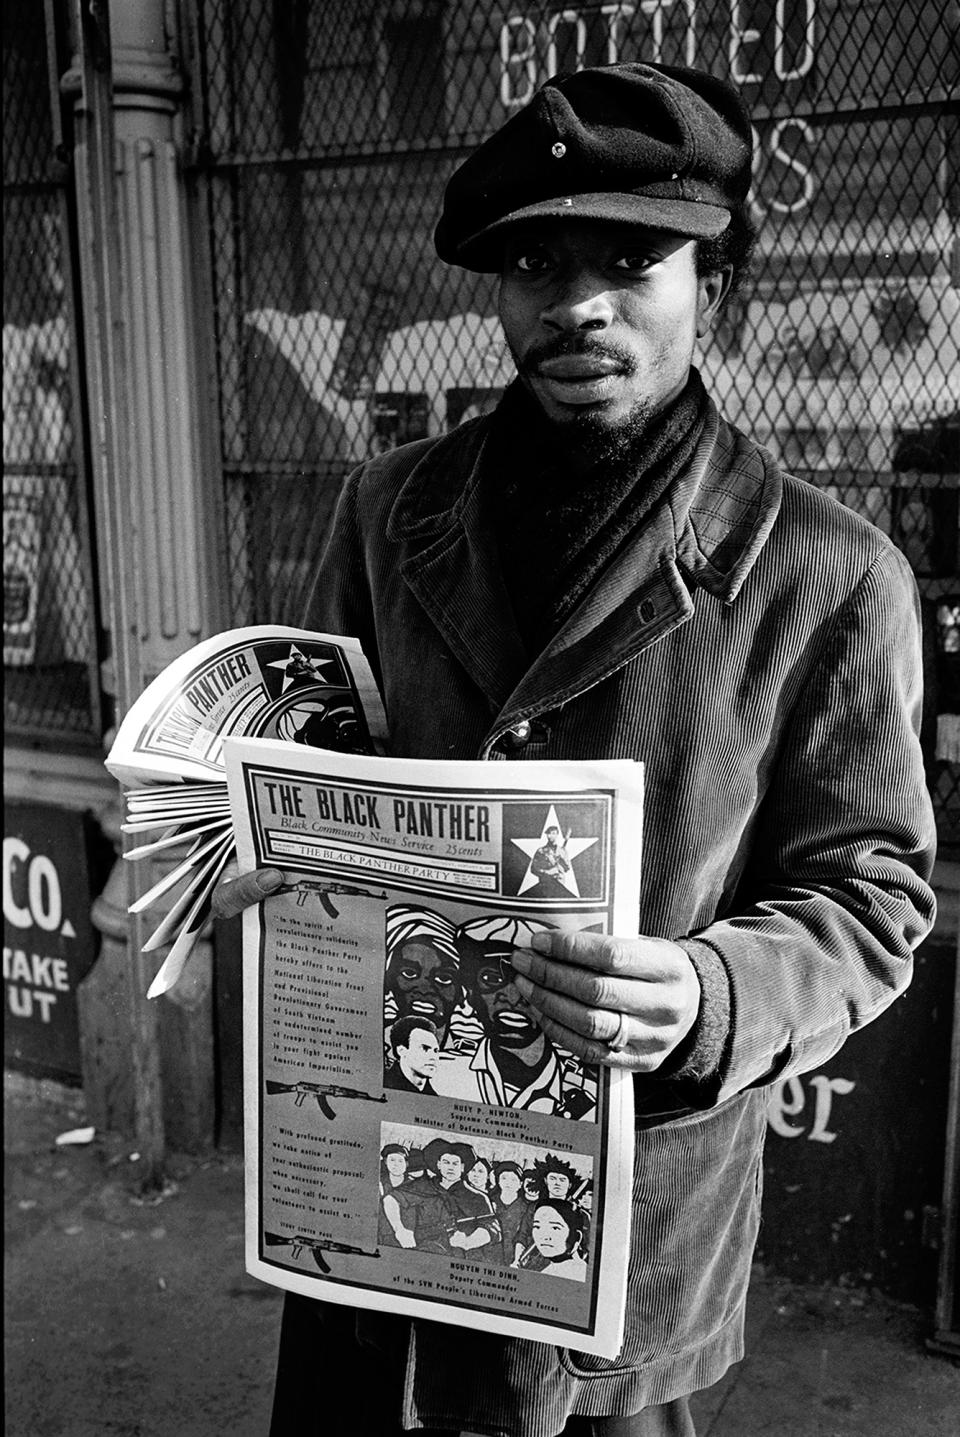 Power to the People: The Black Panthers in Photographs